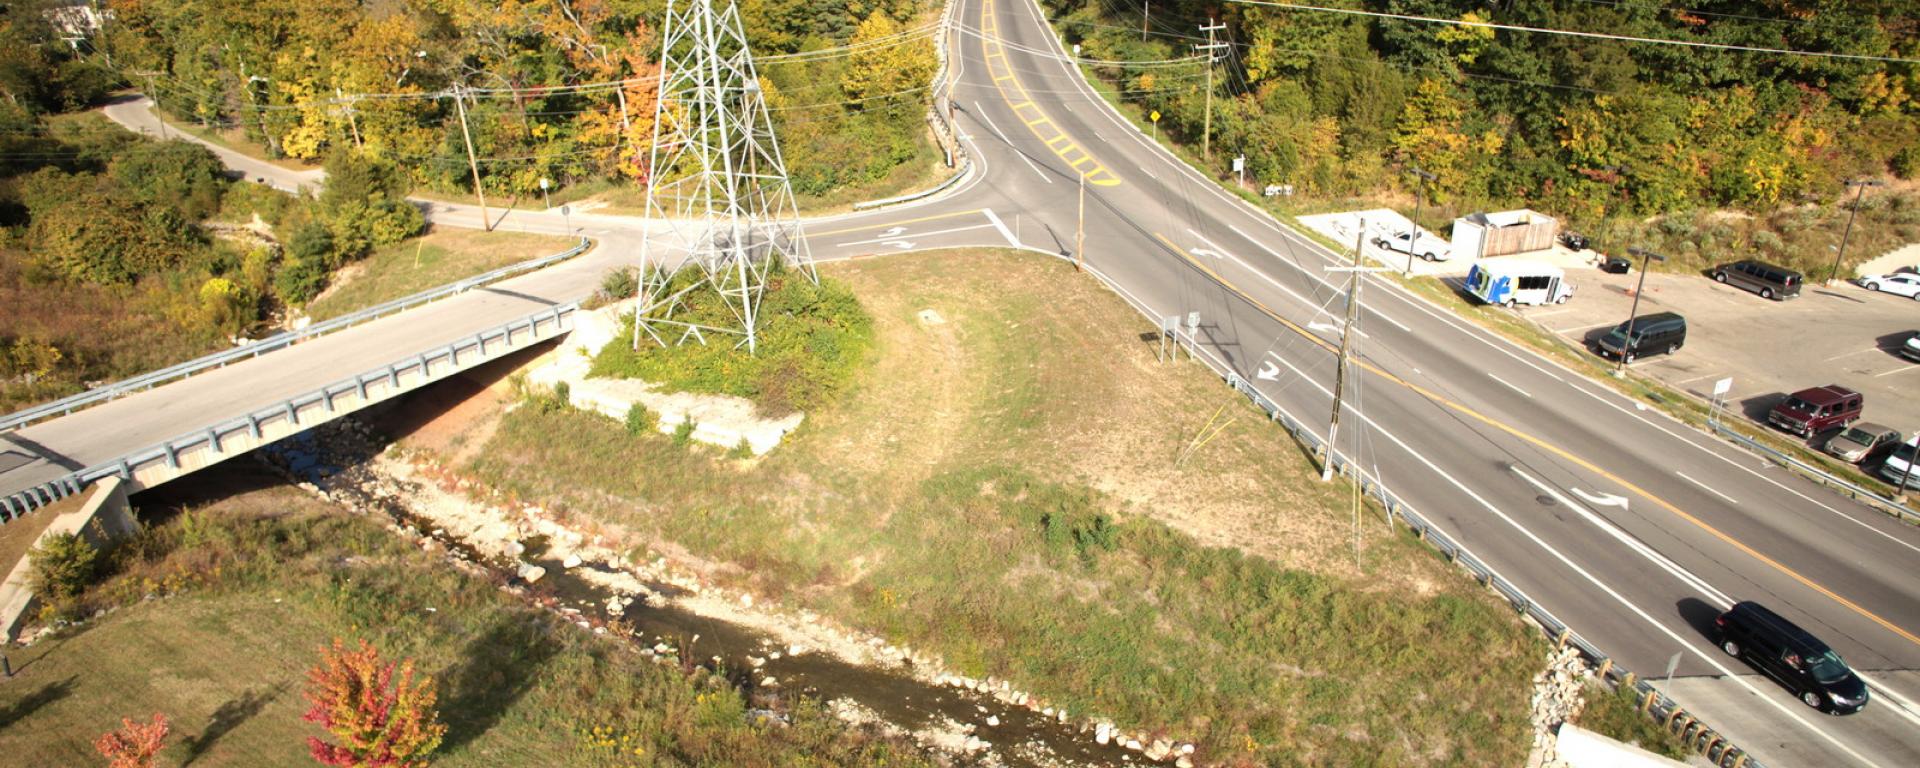 aerial of drainage ditch